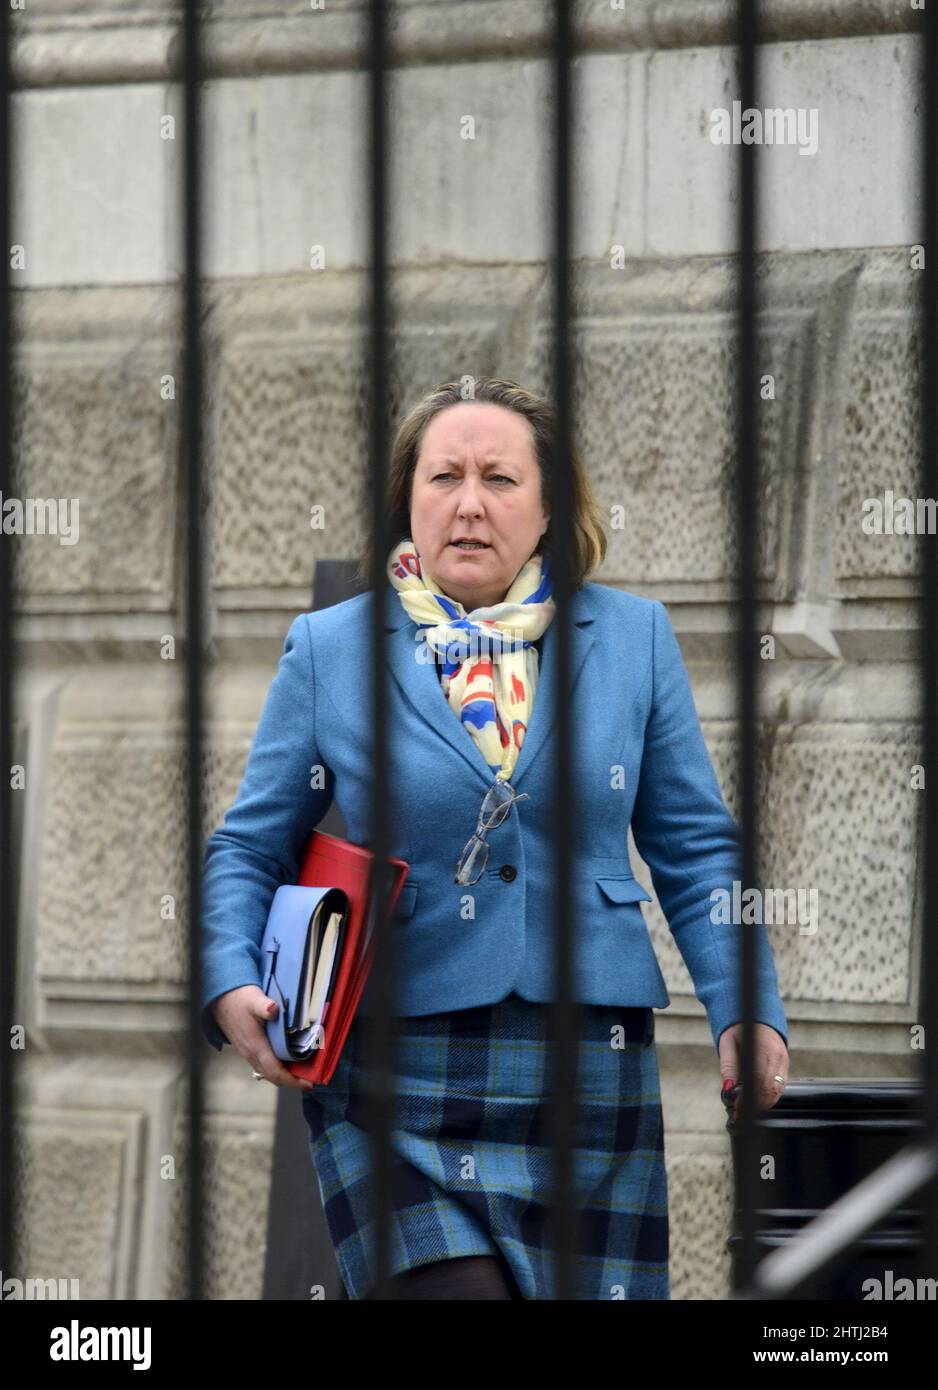 Anne-Marie Trevelyan MP - Secretary of State for International Trade and President of the Board of Trade - leaving Downing Street via Horse Guards Roa Stock Photo